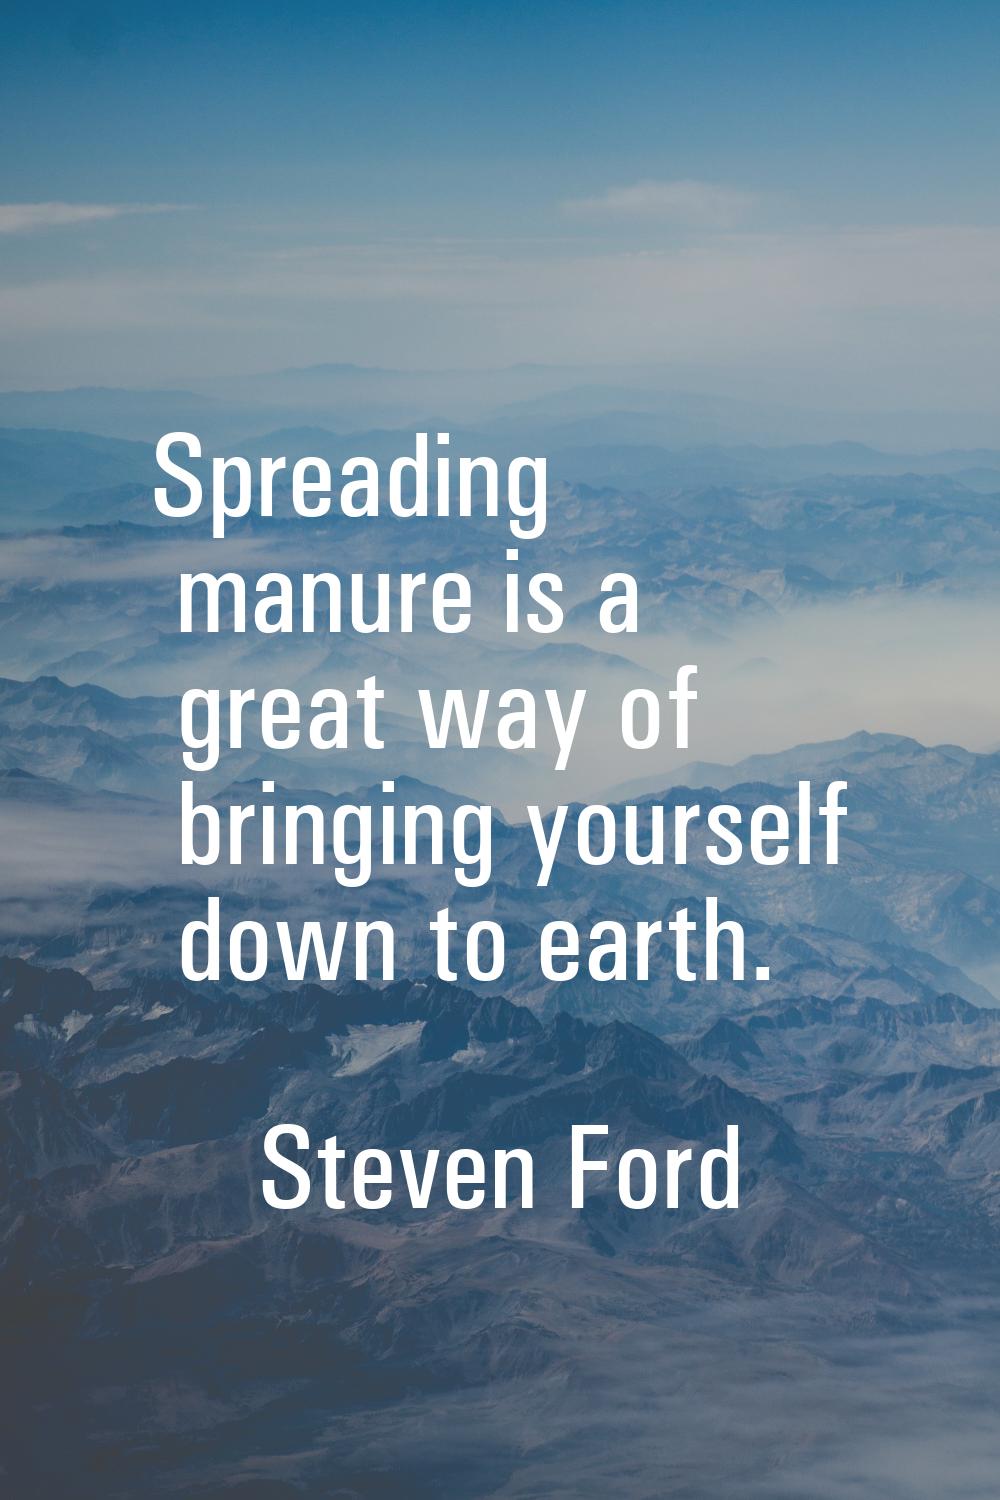 Spreading manure is a great way of bringing yourself down to earth.